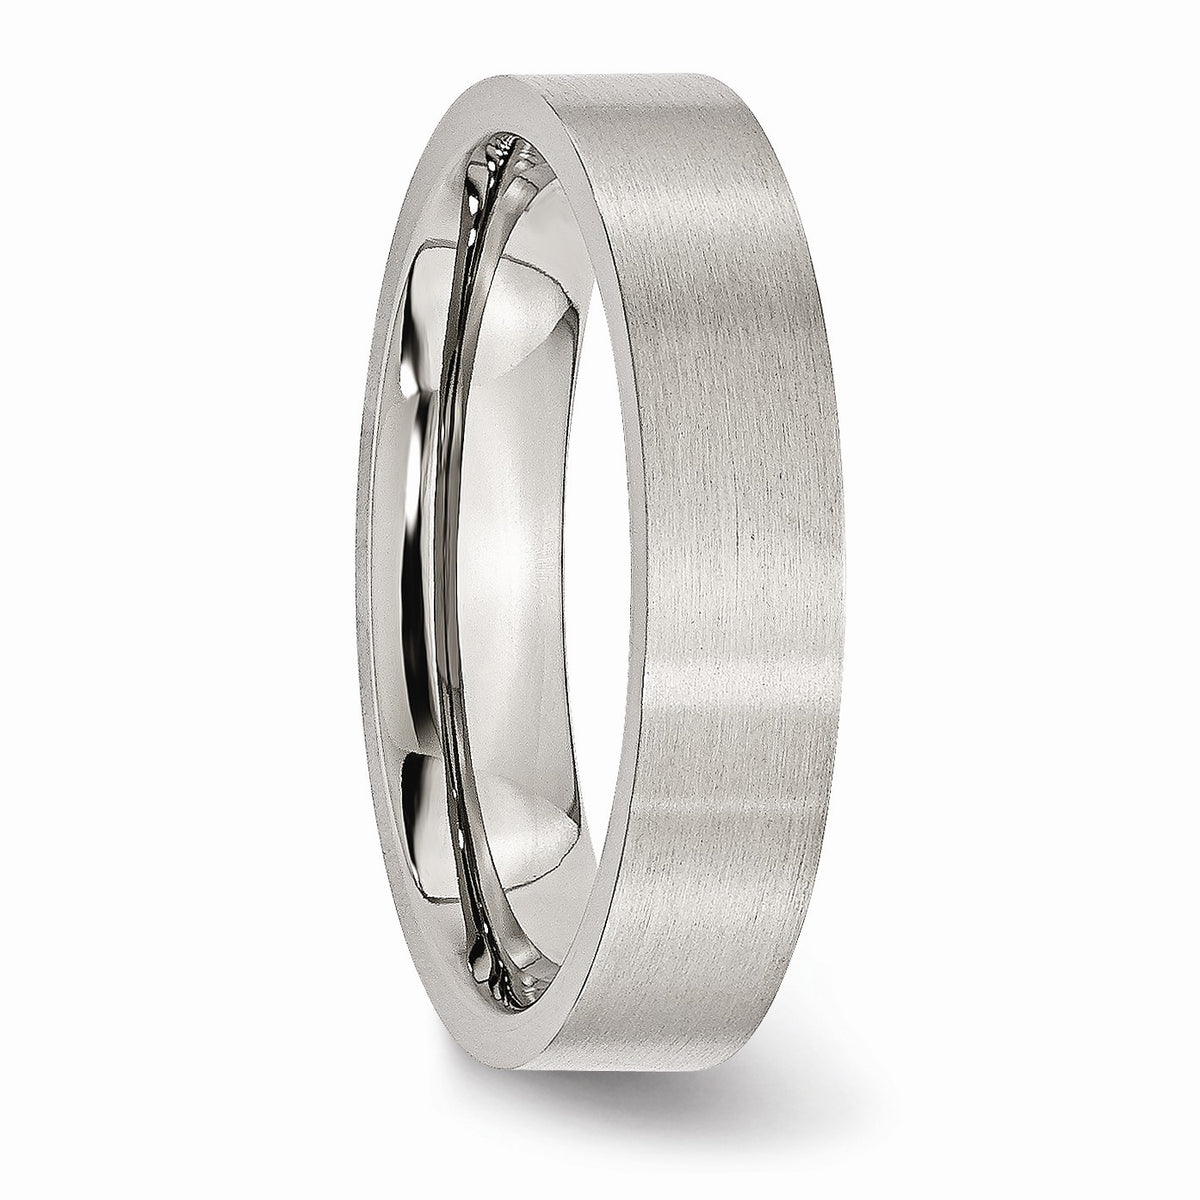 Alternate view of the 5mm Brushed Stainless Steel Flat Comfort Fit Wedding Band by The Black Bow Jewelry Co.